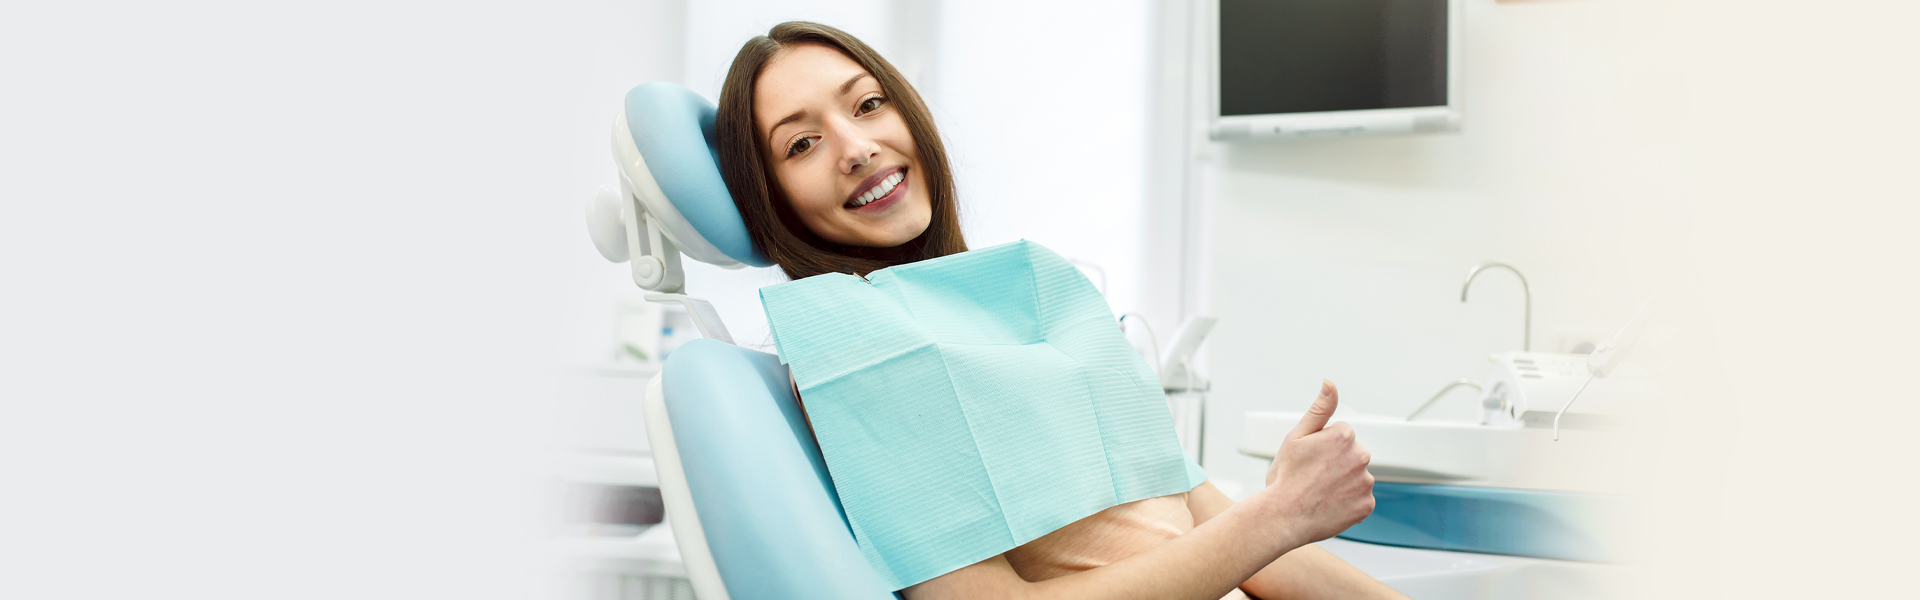 What Are the Different Types of Tooth Fillings? | Dental Fillings Types